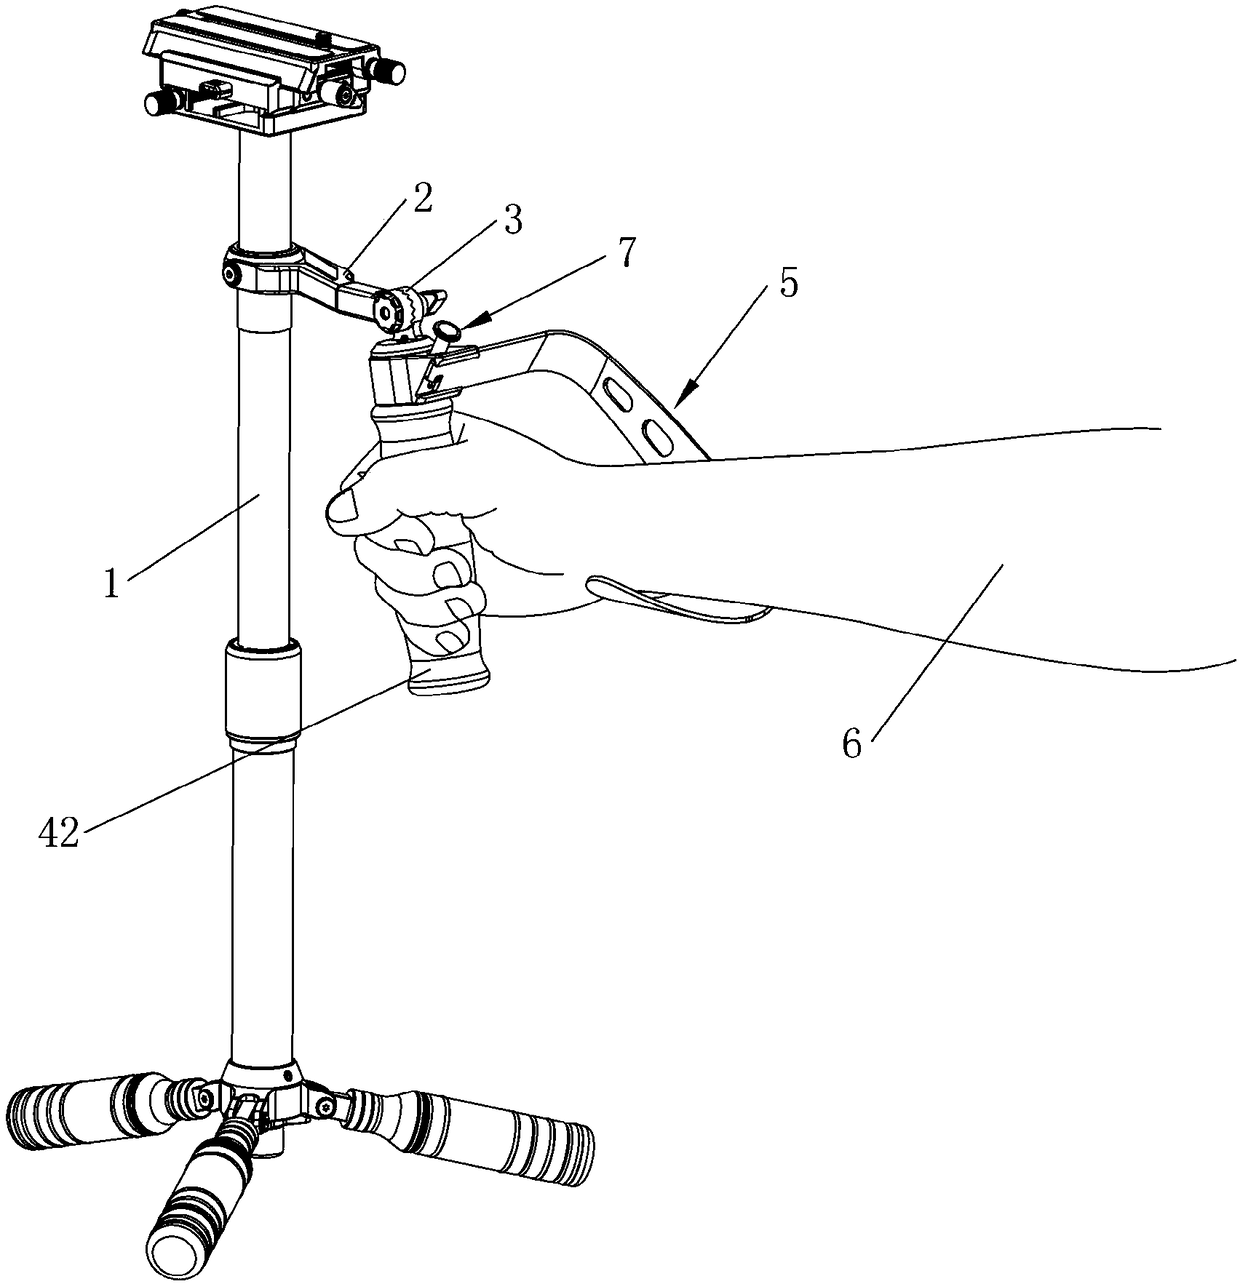 Handle with arm support for camera shooting apparatus